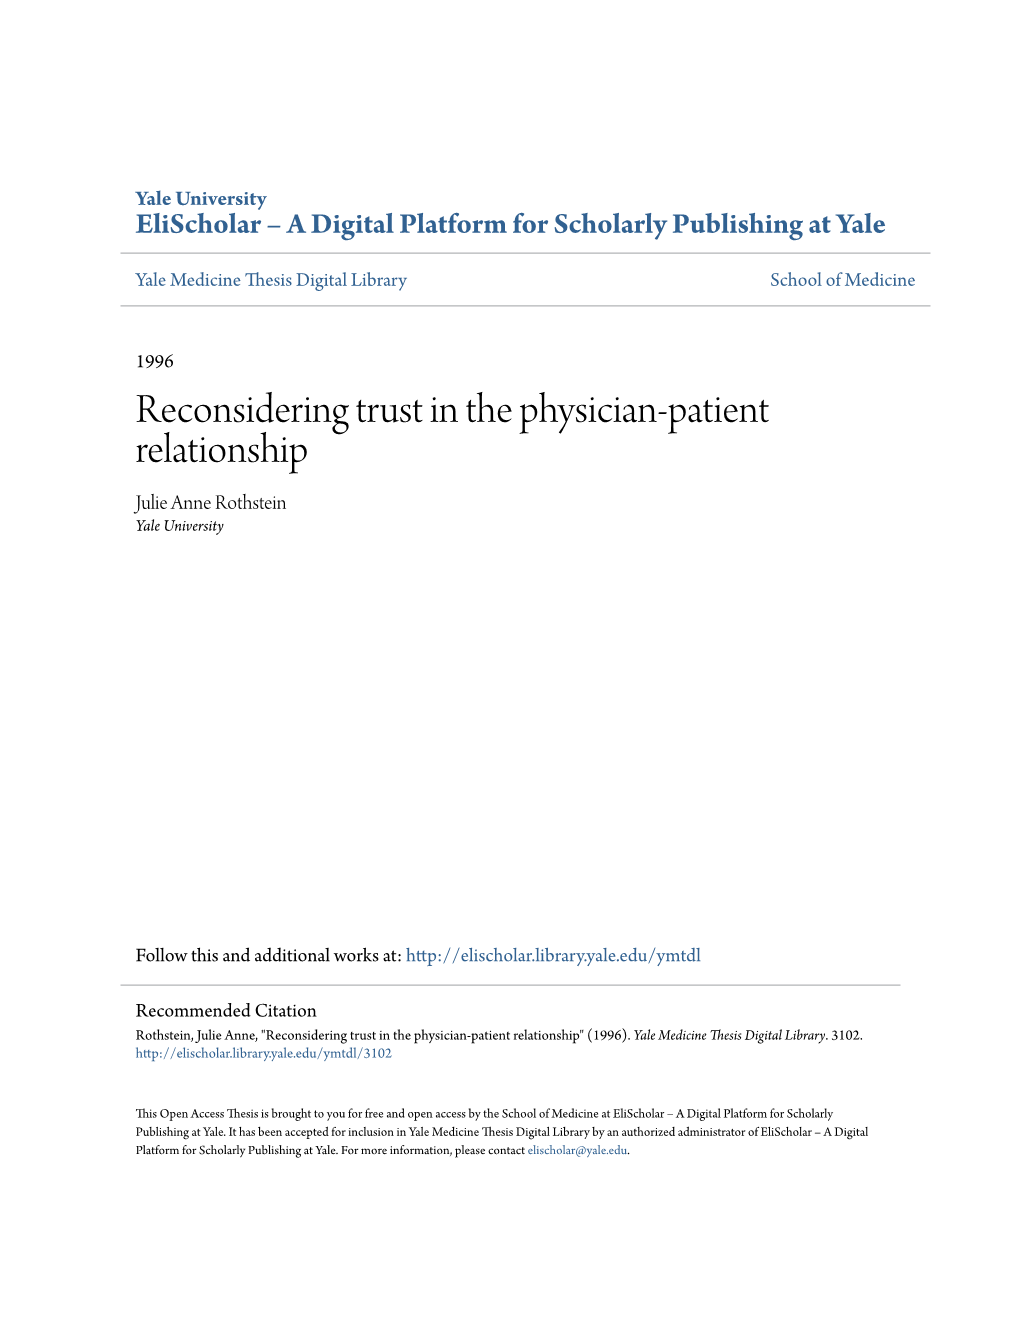 Reconsidering Trust in the Physician-Patient Relationship Julie Anne Rothstein Yale University